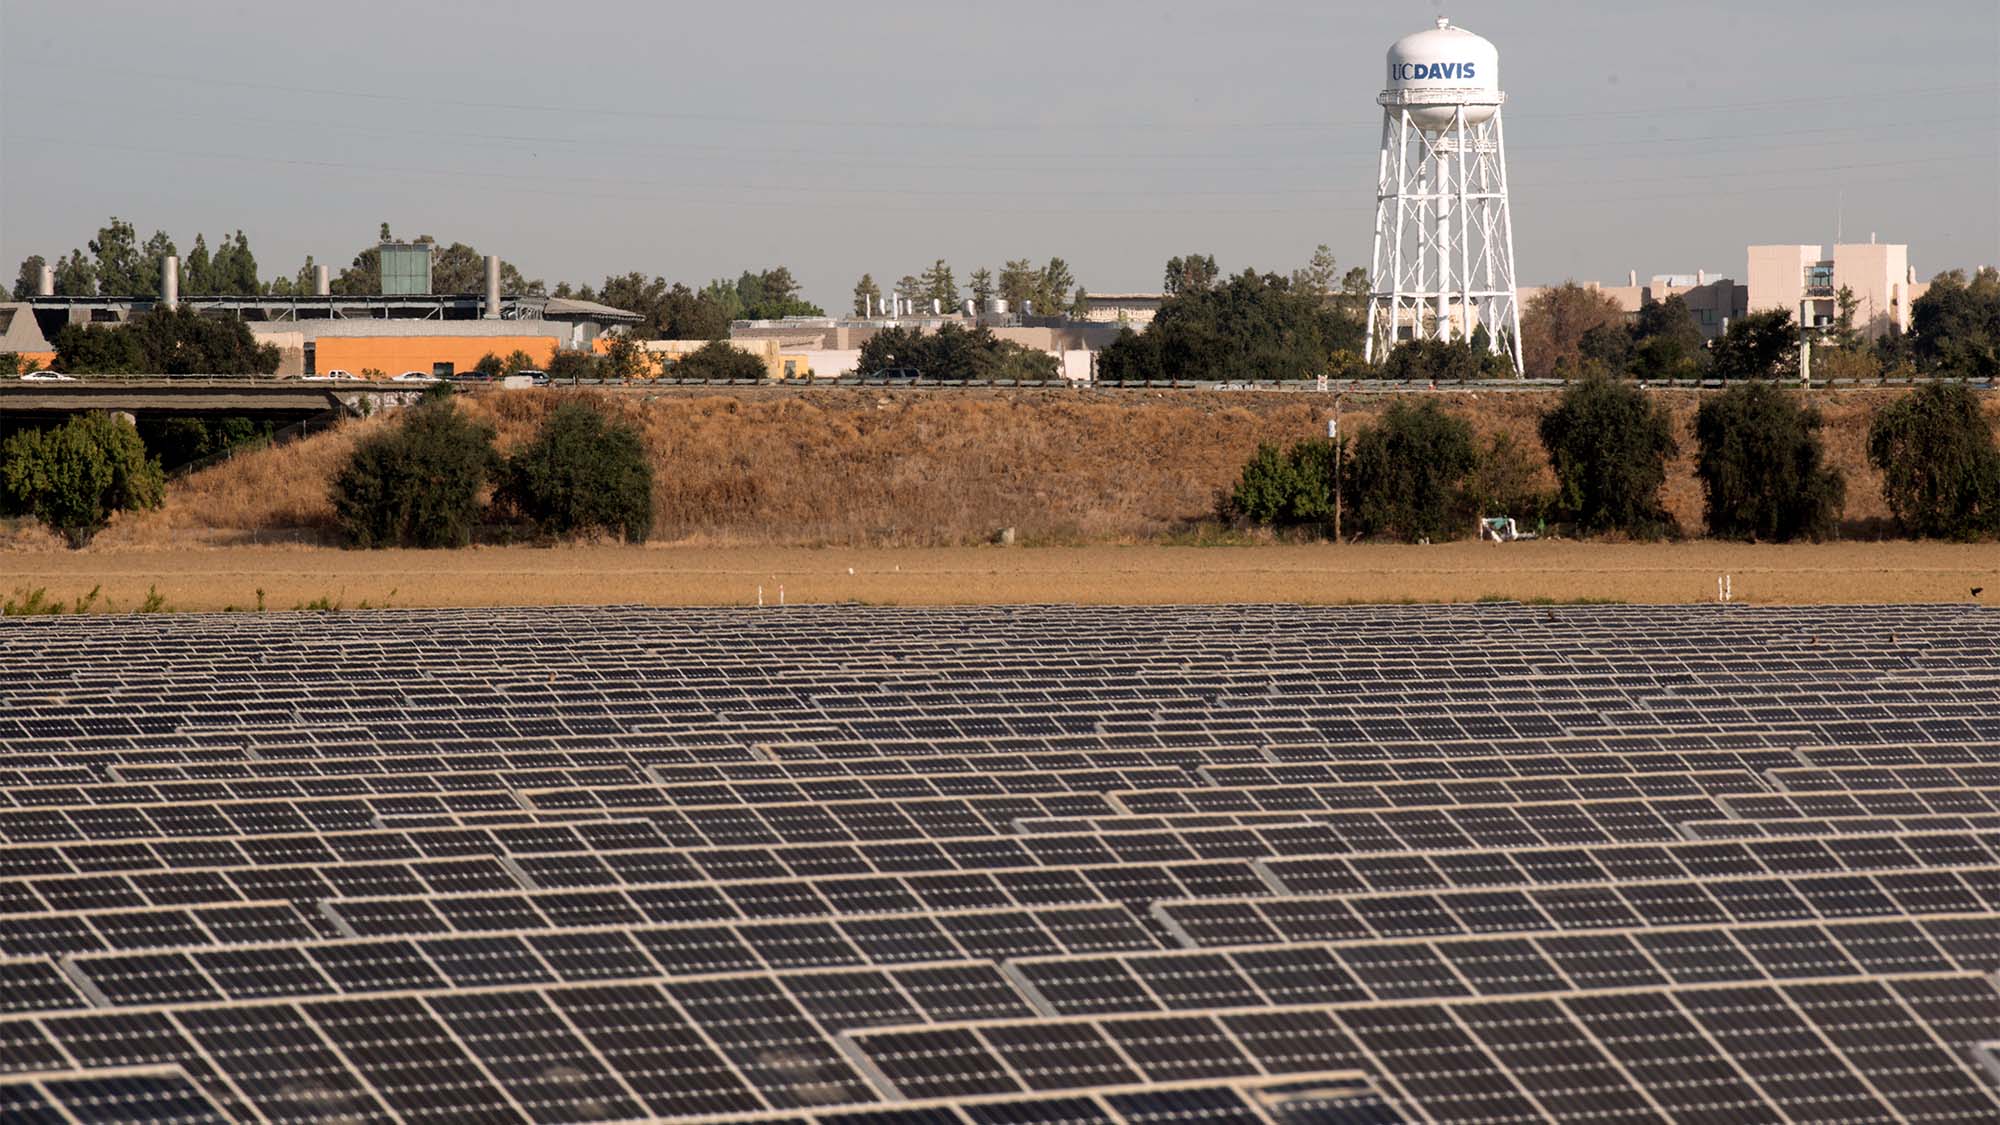 Solar farm with ˽̳ Davis water tower in background.